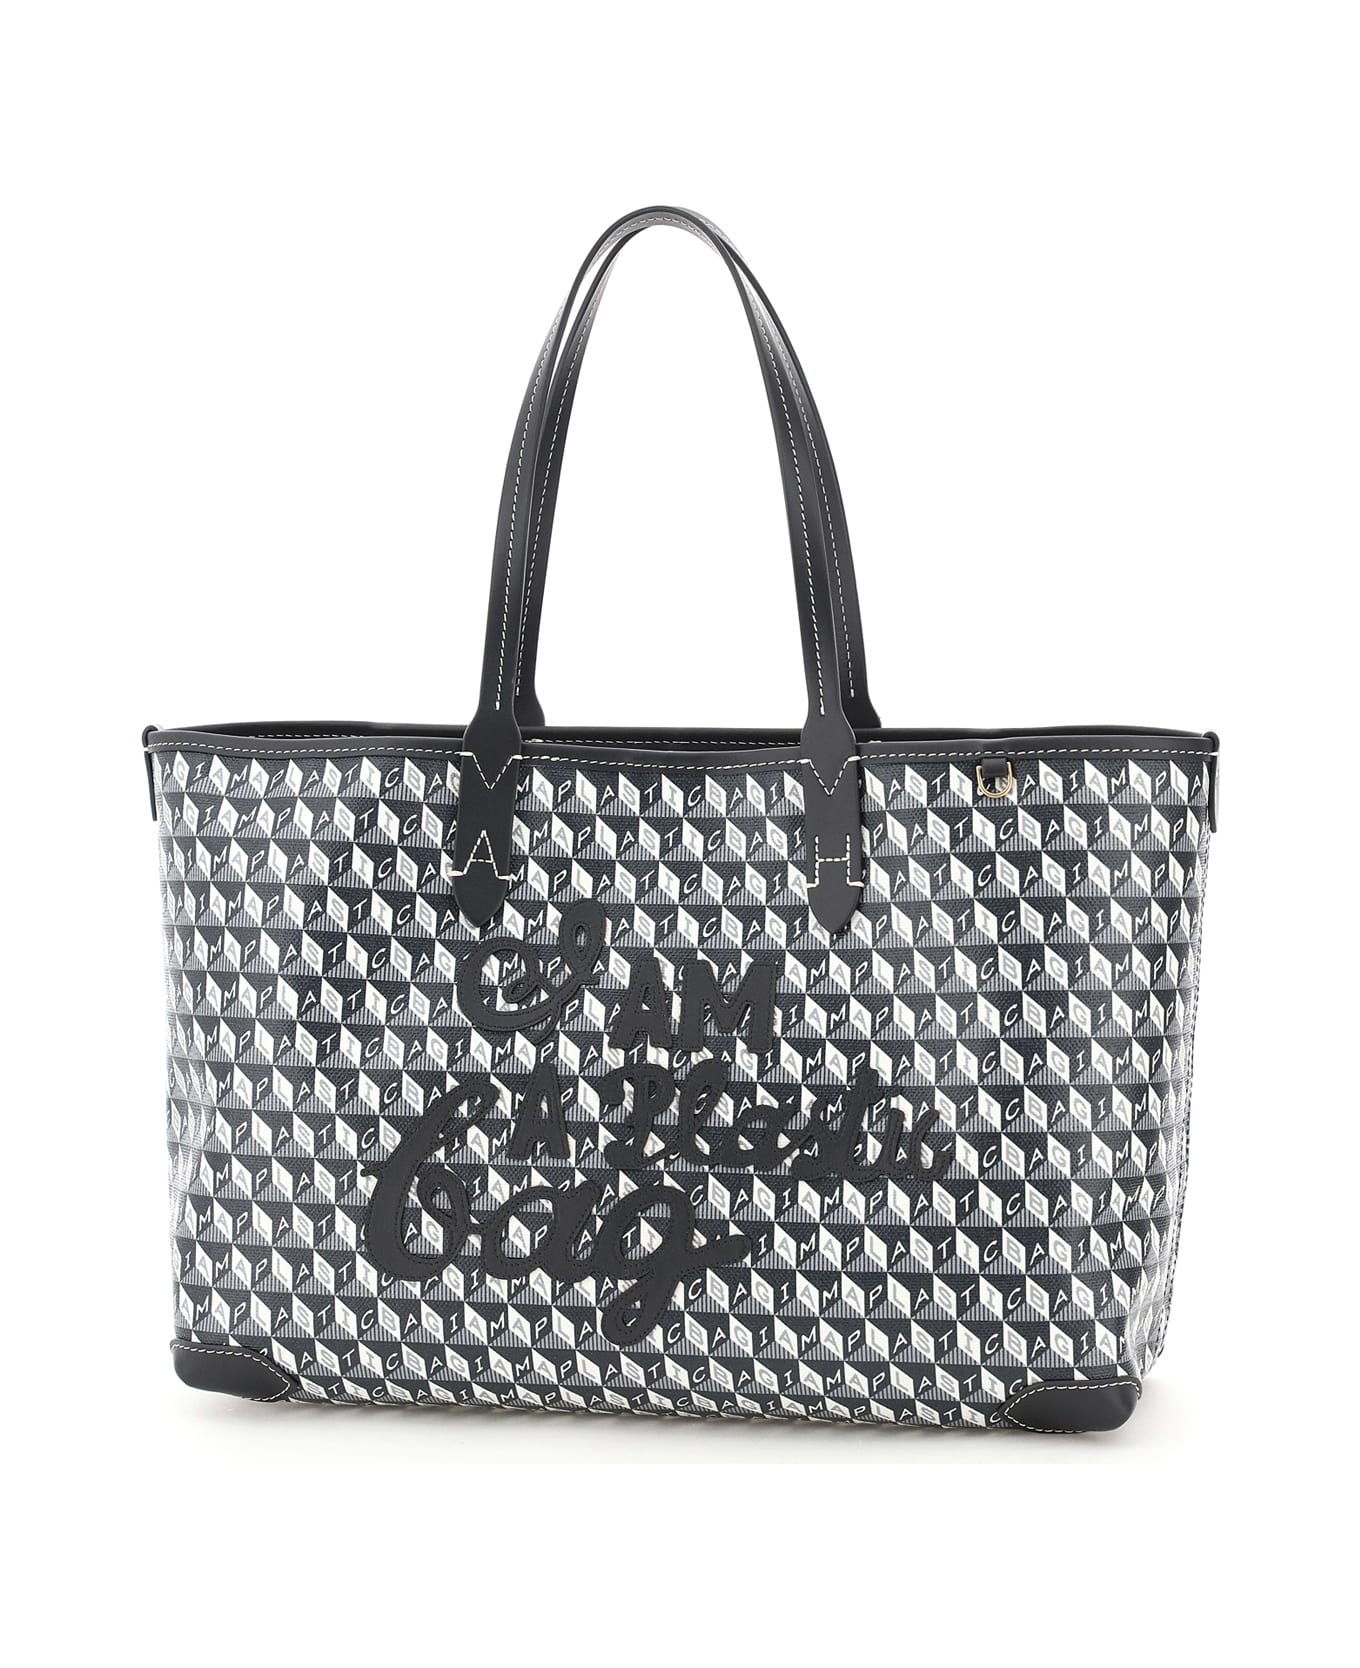 Anya Hindmarch I Am A Plastic Bag Small Tote Bag - CHARCOAL (White) トートバッグ